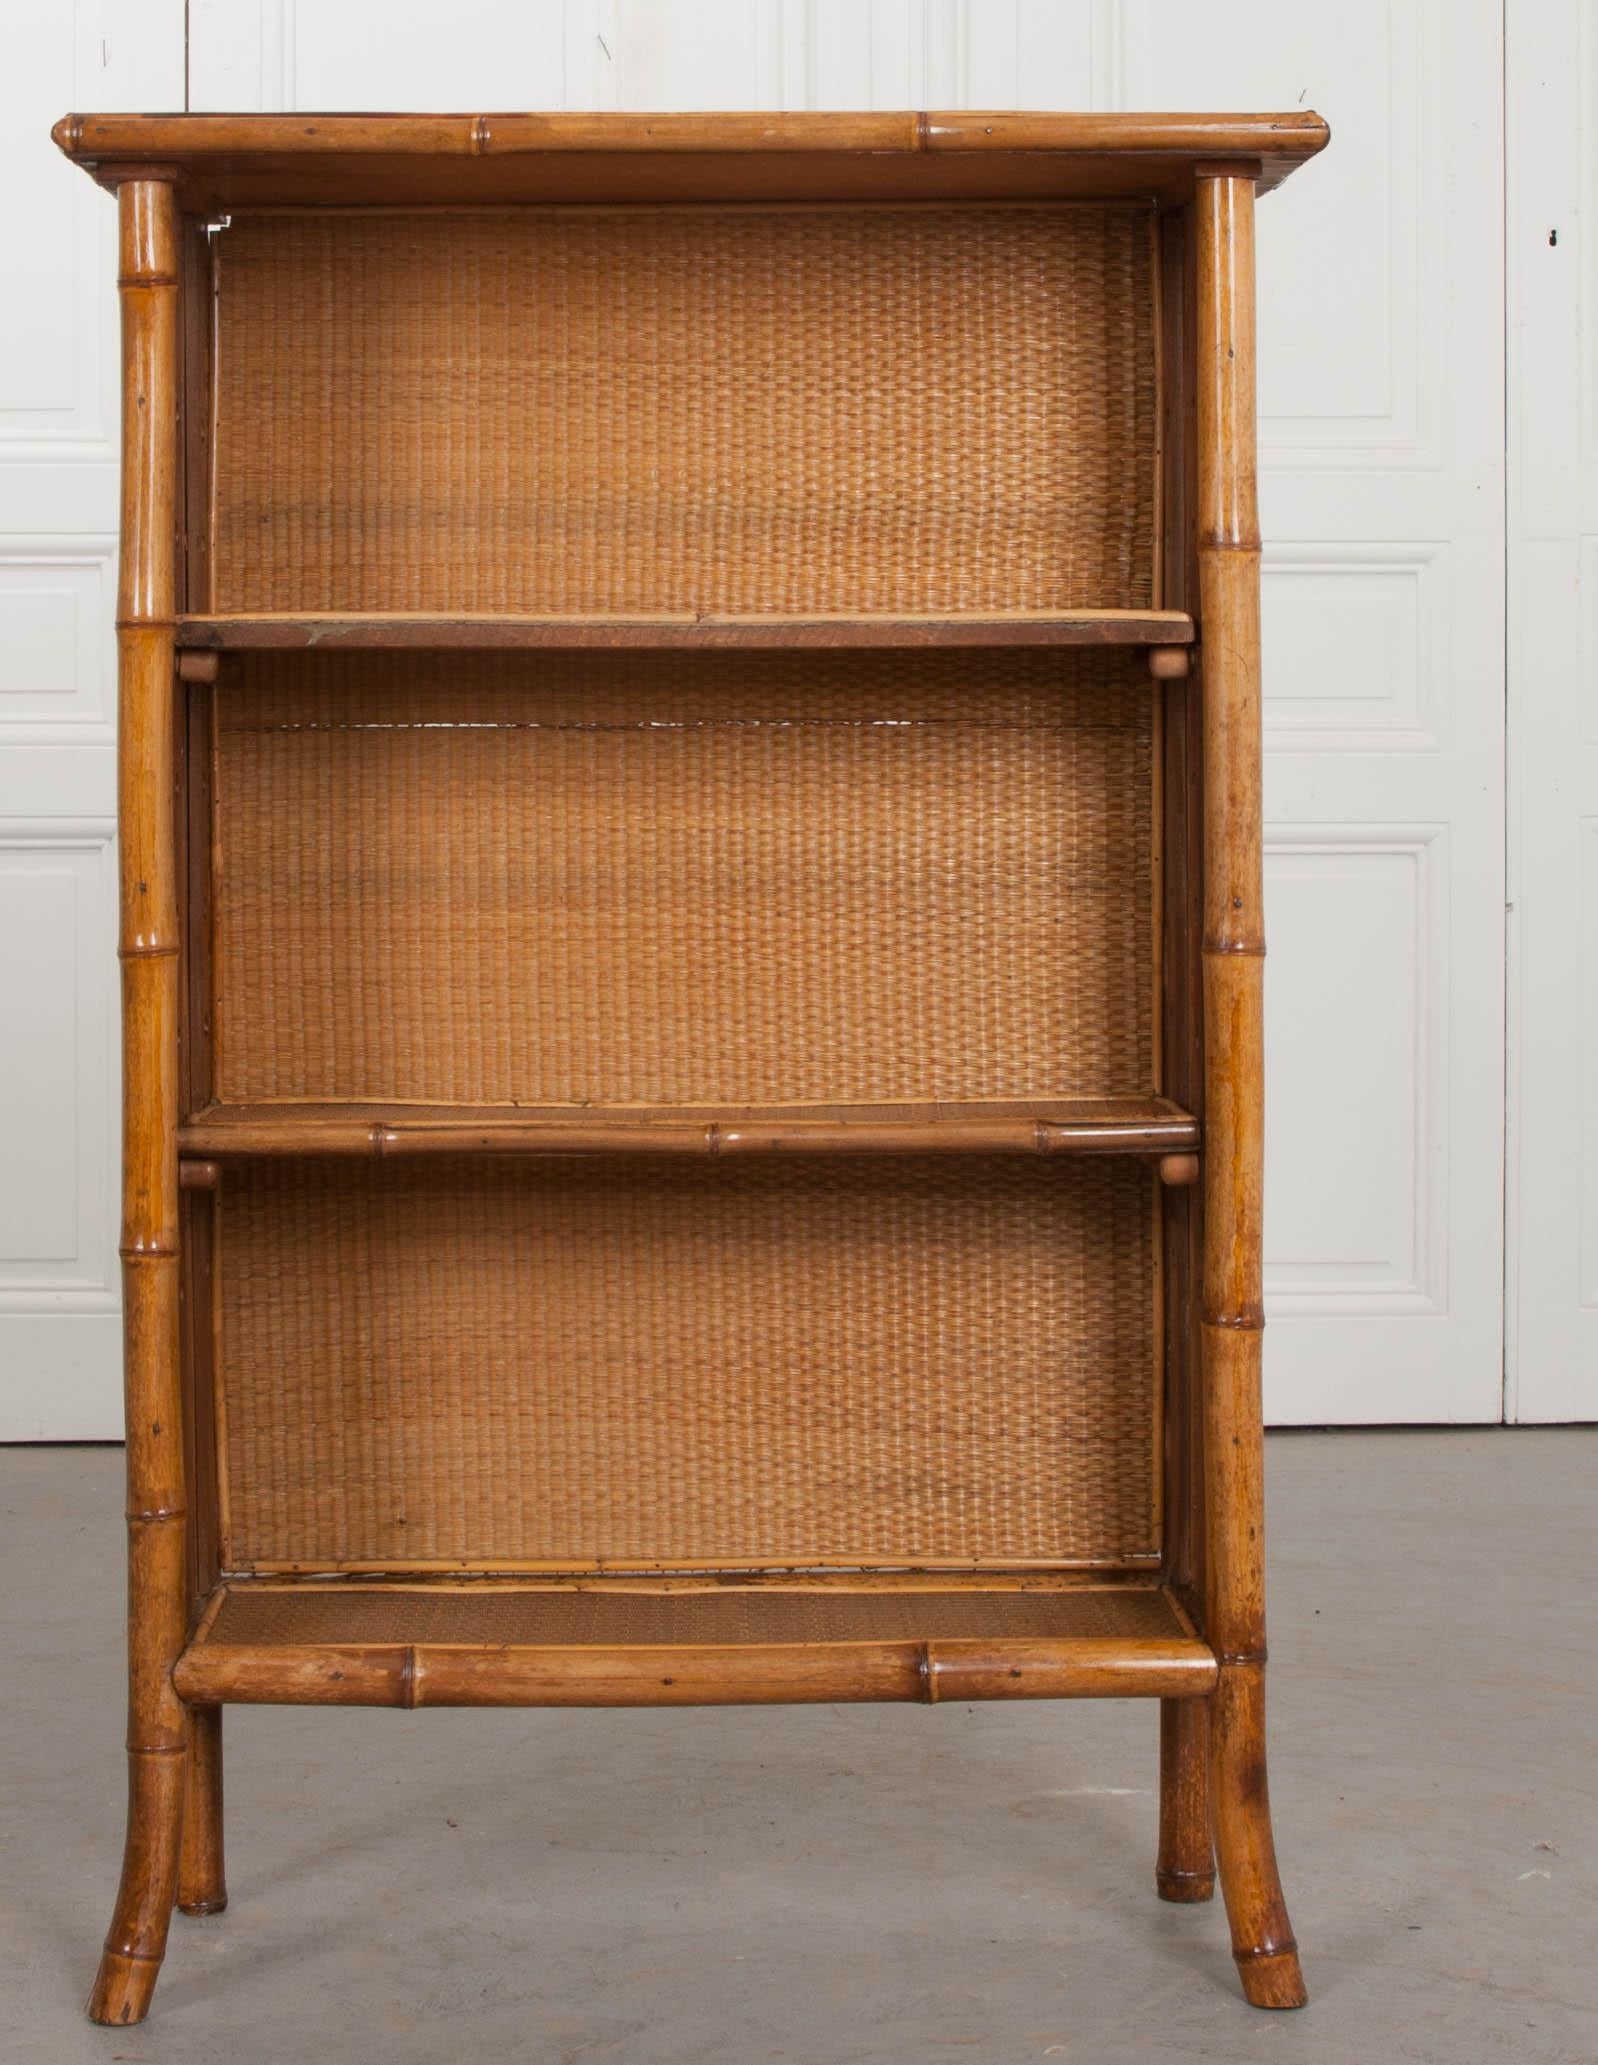 A wonderful English bamboo bookshelf from the 1890s, that has been recently refinished. It has been finished in a gorgeous black and gold découpage. The woven seagrass found in the interior is remarkably intact. This small bookcase has two centre